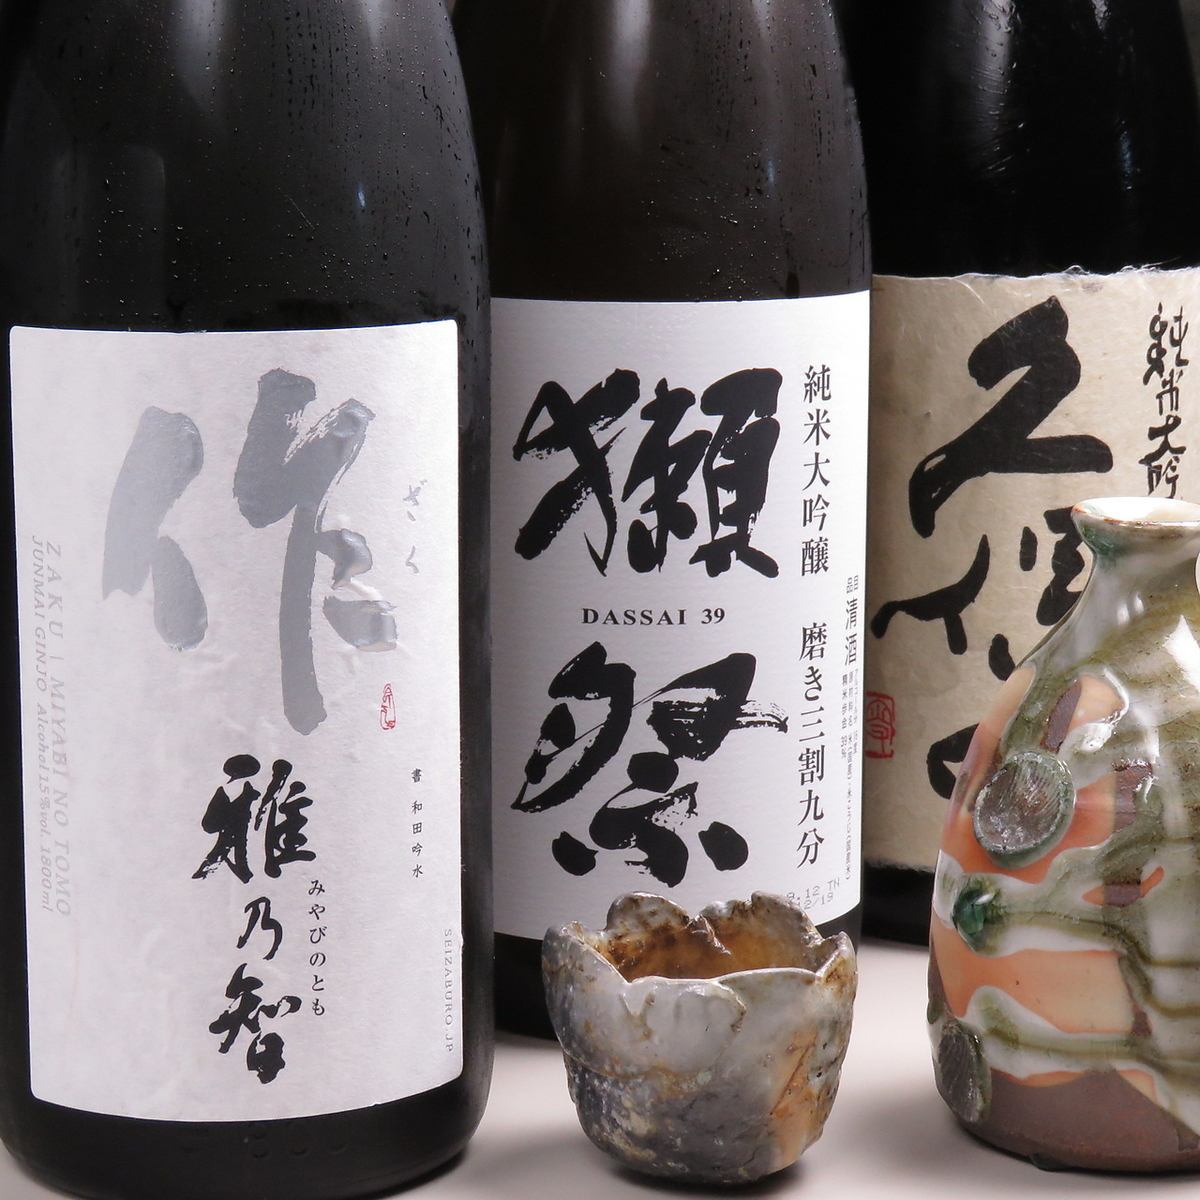 We have a wide variety of sake, wine, fruit liquor, shochu, and other alcoholic beverages selected by the owner.